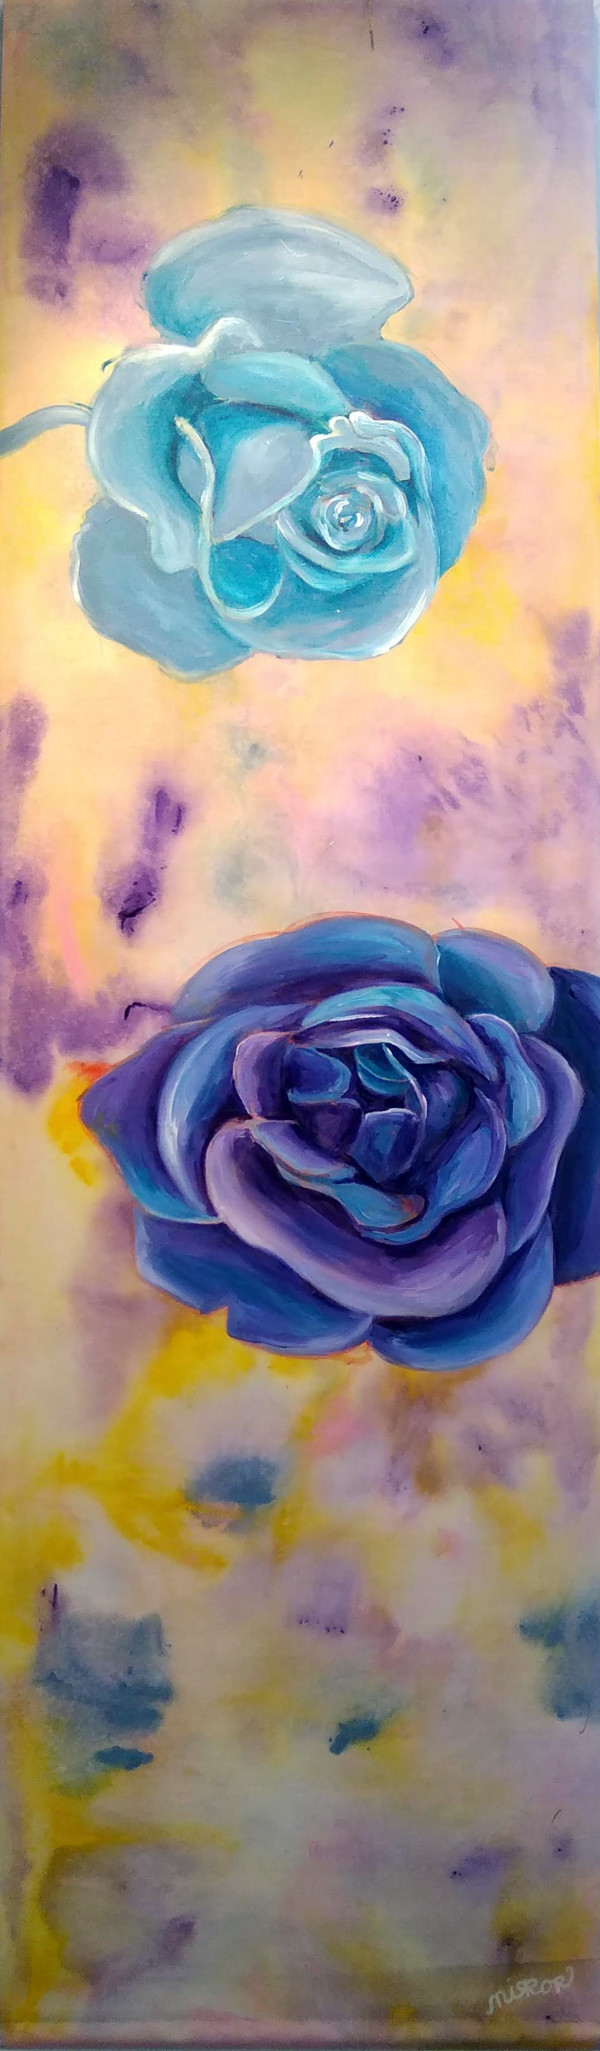 Blue Scroll (Roses) by MIRROR Art Duo